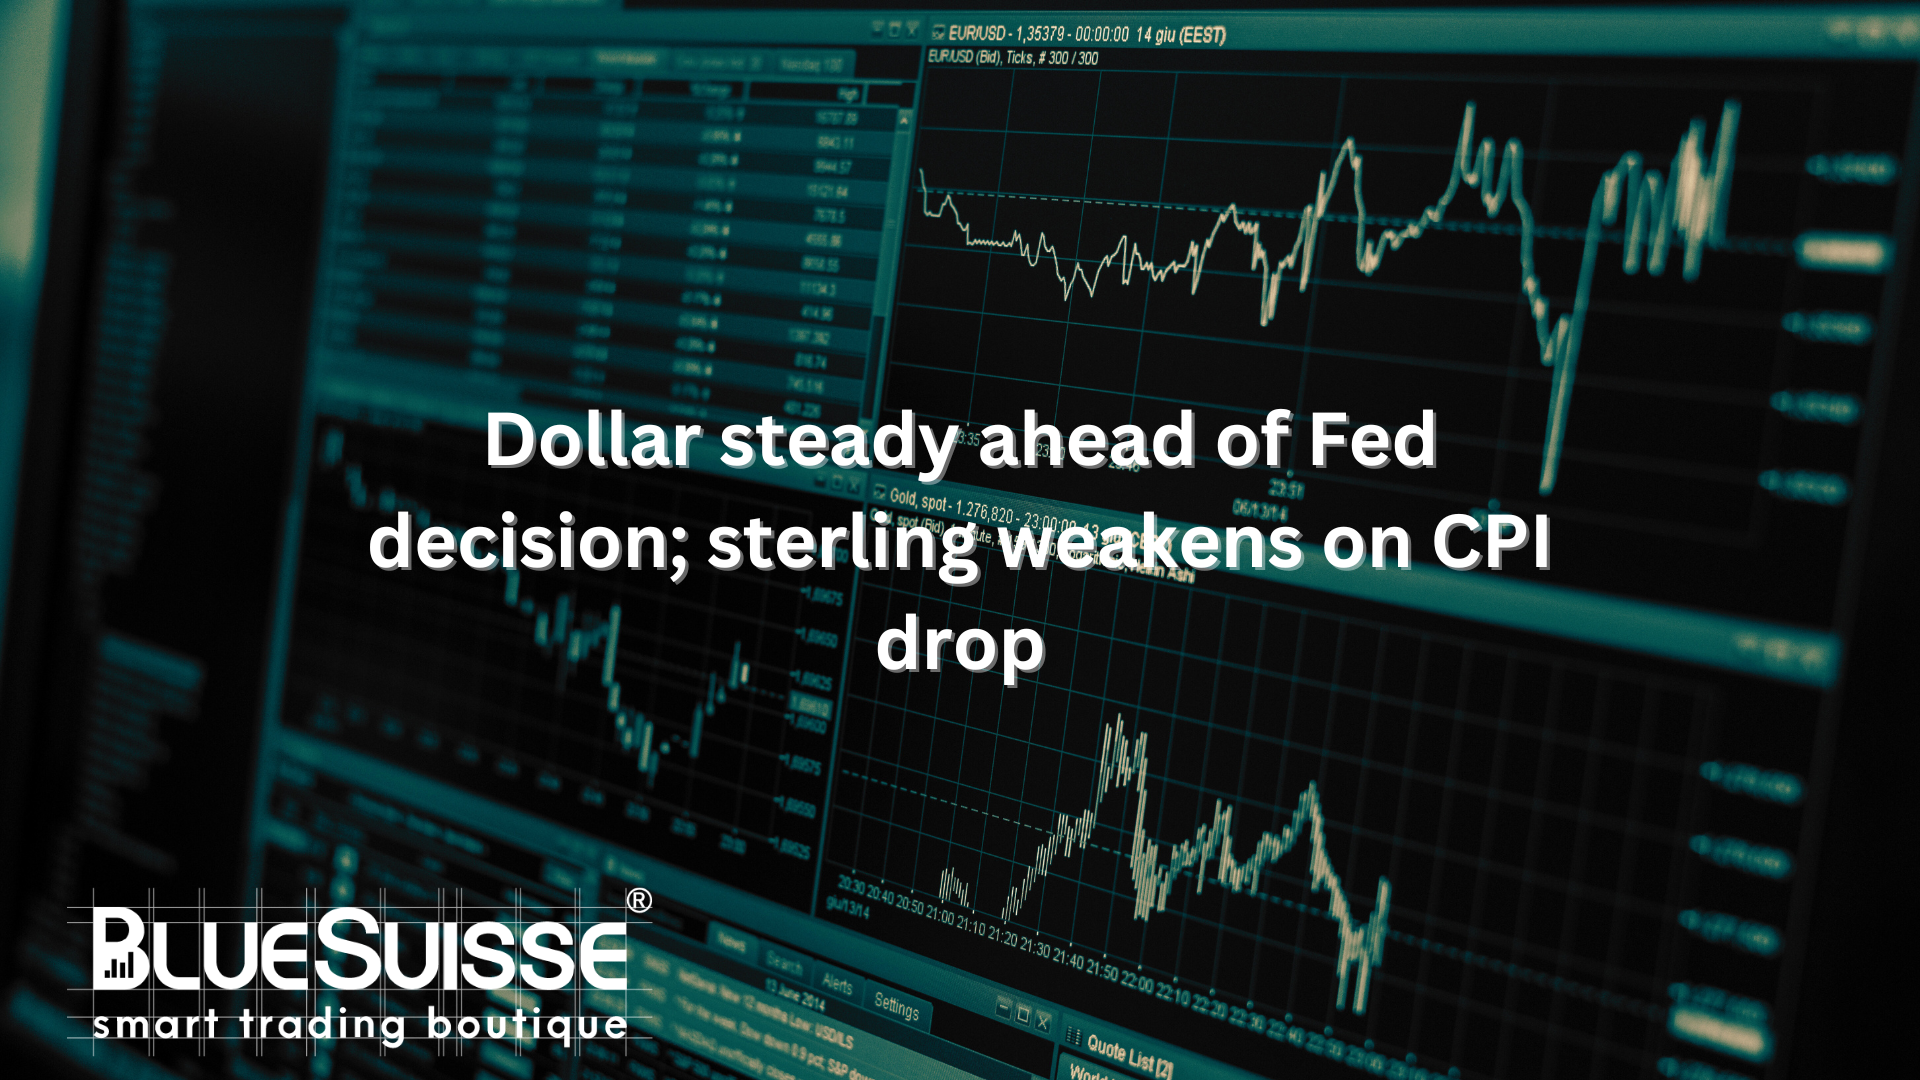 Dollar steady ahead of Fed decision; sterling weakens on CPI drop